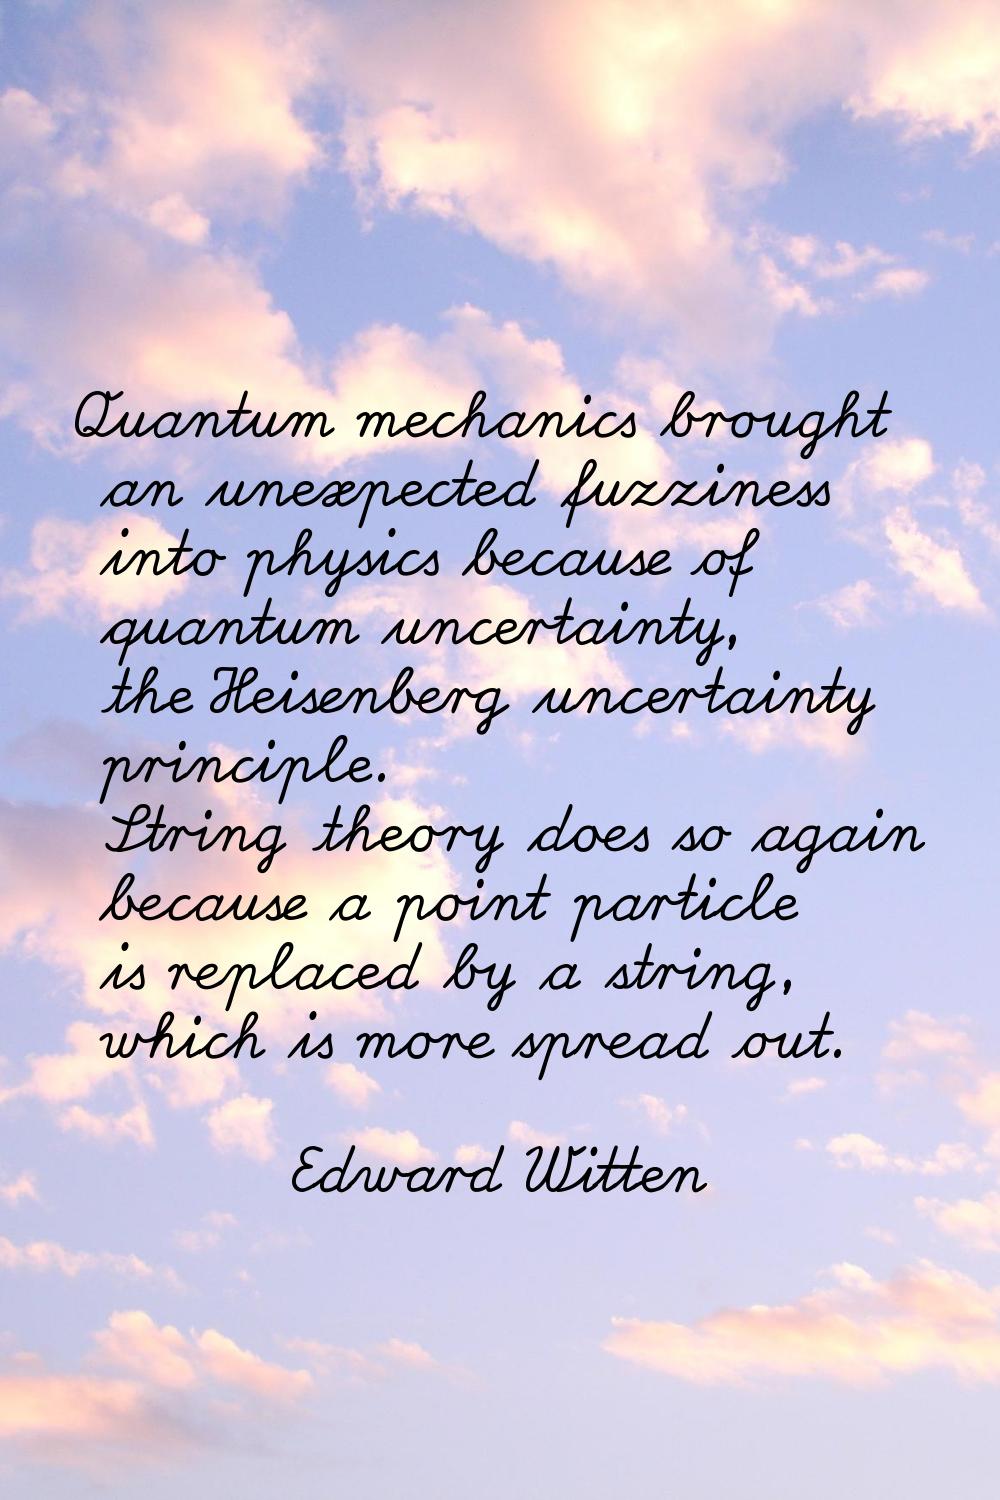 Quantum mechanics brought an unexpected fuzziness into physics because of quantum uncertainty, the 